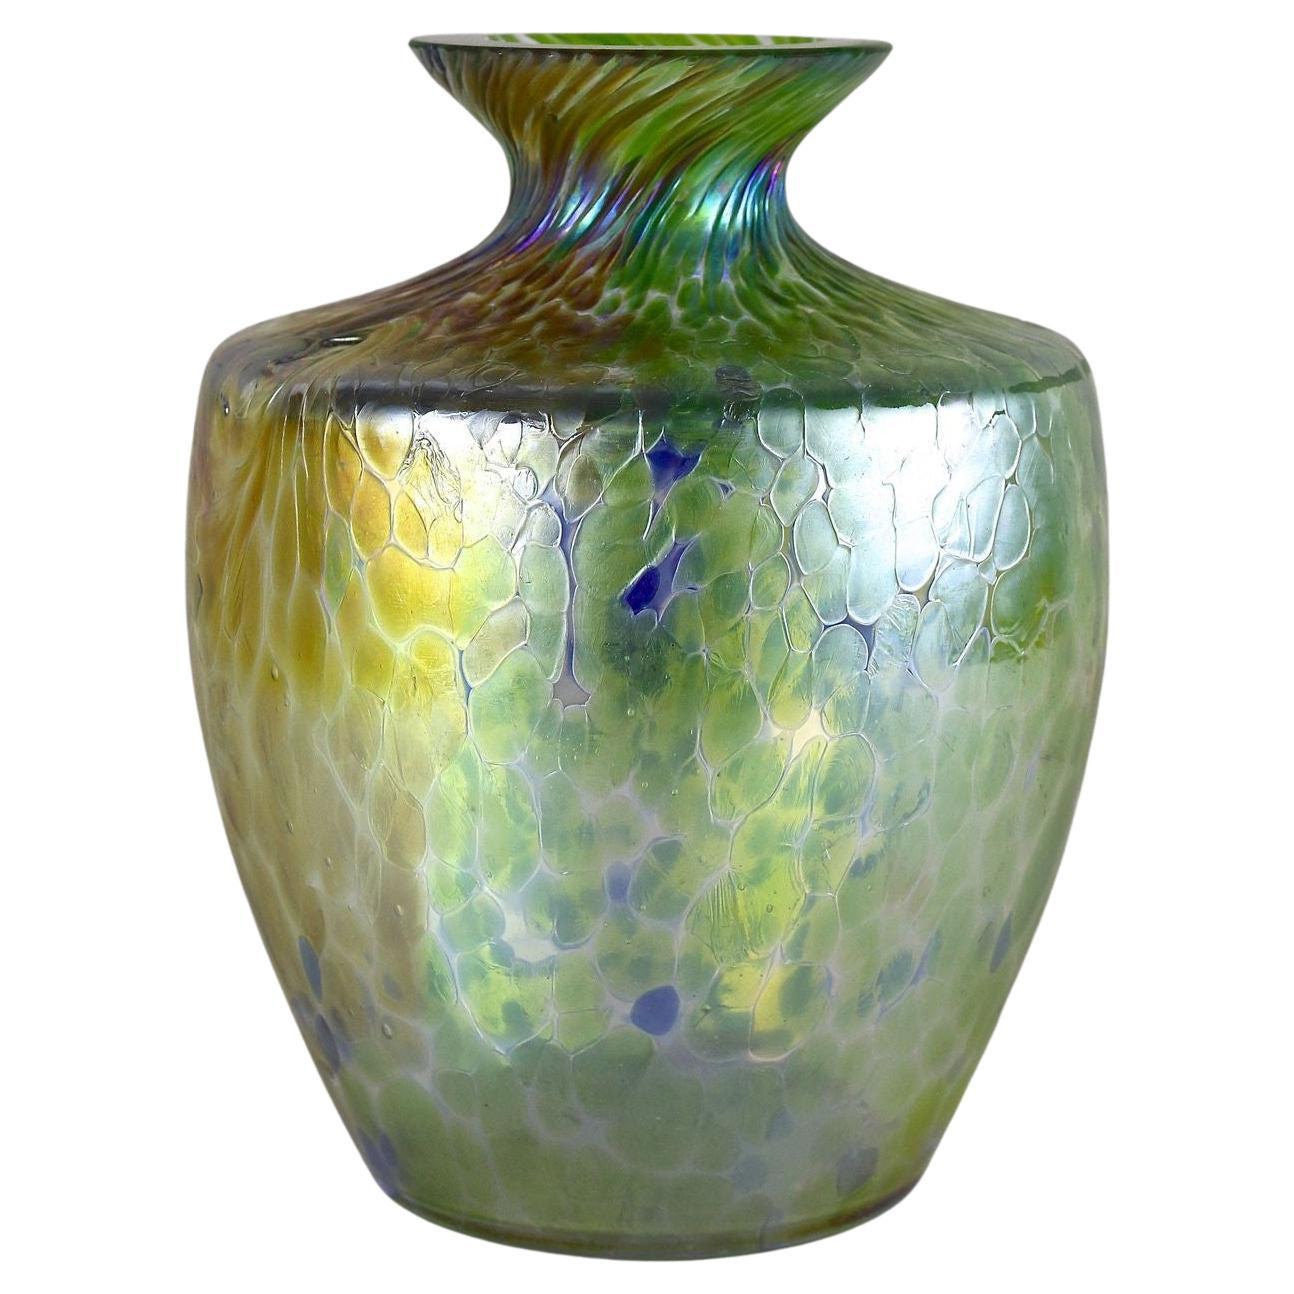 Iridescent Art Nouveau Glass Vase Attributed To Fritz Heckert, Bohemia ca. 1905 For Sale